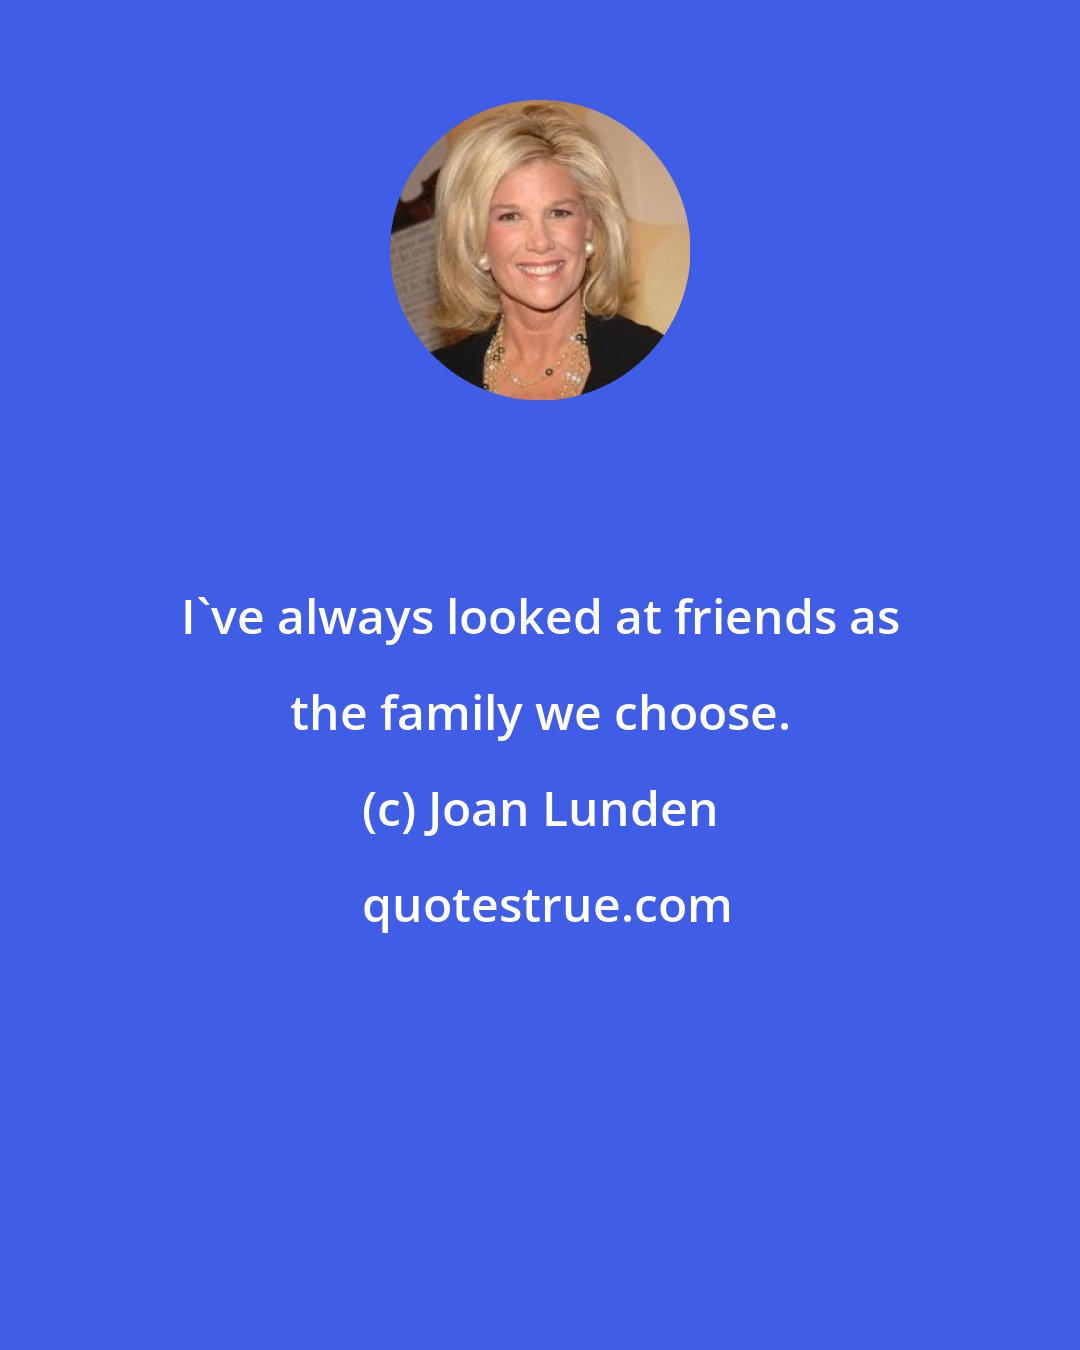 Joan Lunden: I've always looked at friends as the family we choose.